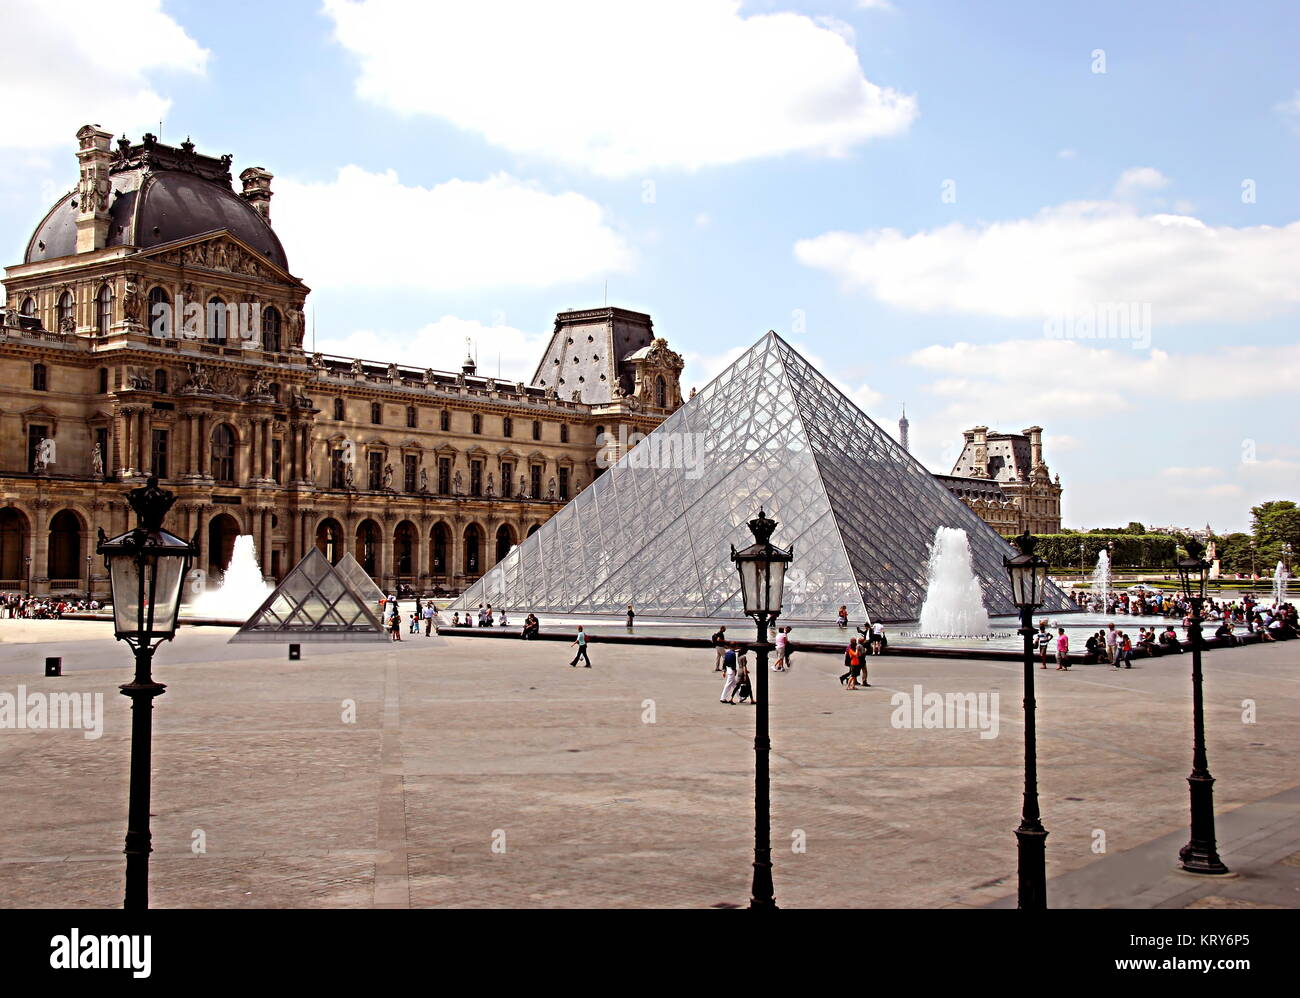 View of the main courtyard of the Louvre Palace with the glass and metal Pyramid (Pyramide du Louvre), and several tourists enjoying the sunny day Stock Photo